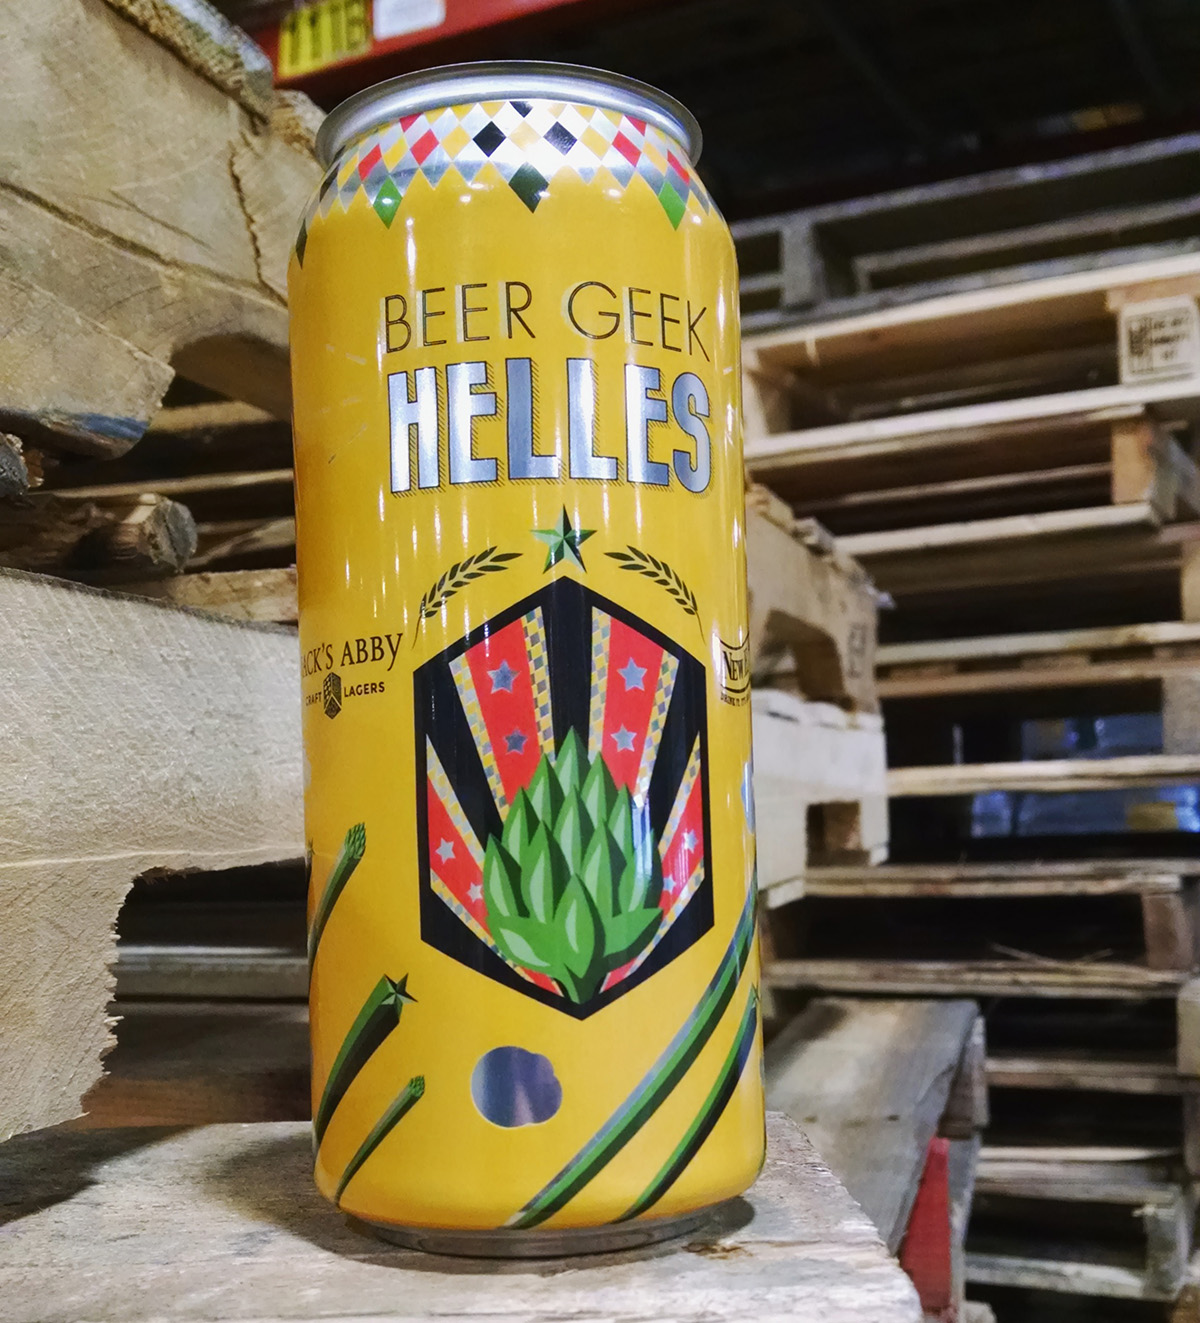 Beer Geek Helles, by Jack's Abby and New England Brewing Company. / Photo provided.